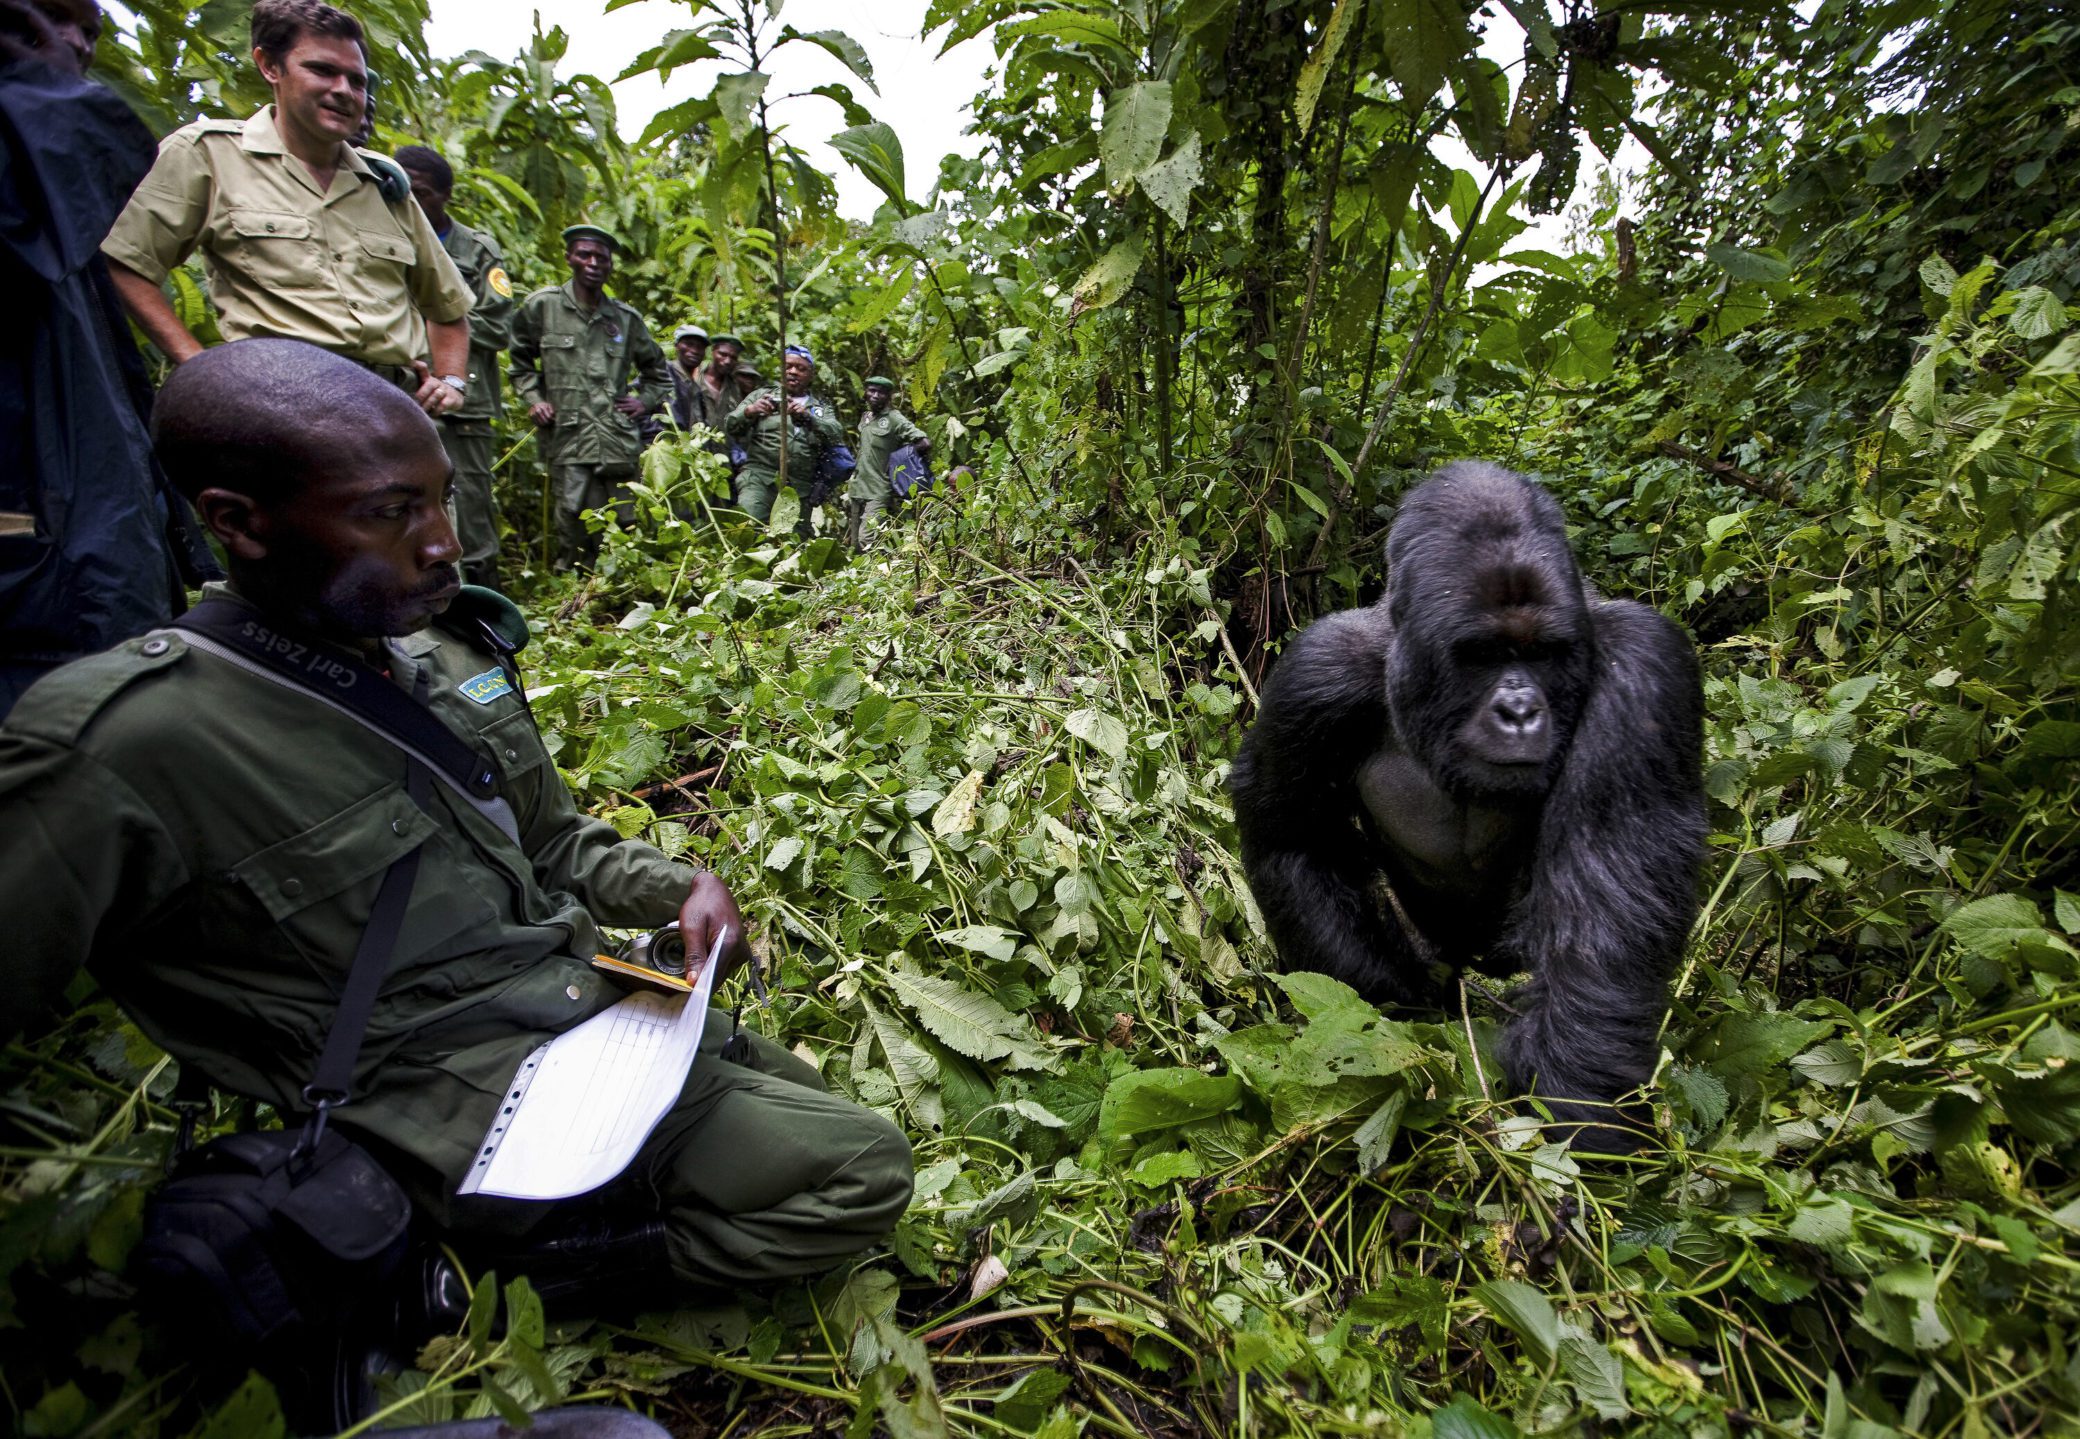 An image of rangers monitoring mountain gorillas in the rainforest